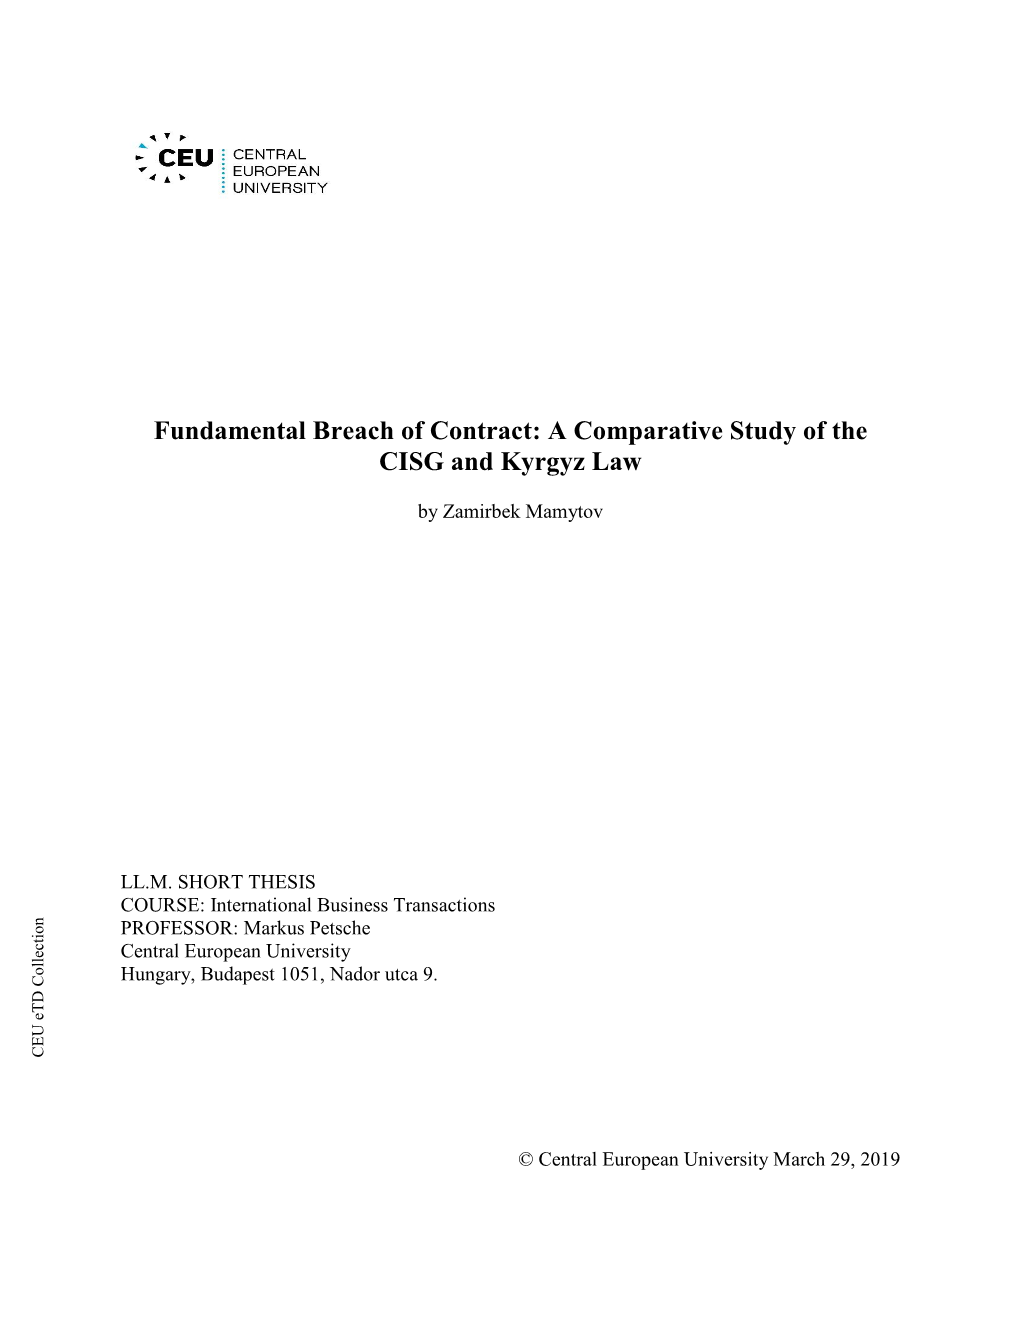 Fundamental Breach of Contract: a Comparative Study of the CISG and Kyrgyz Law